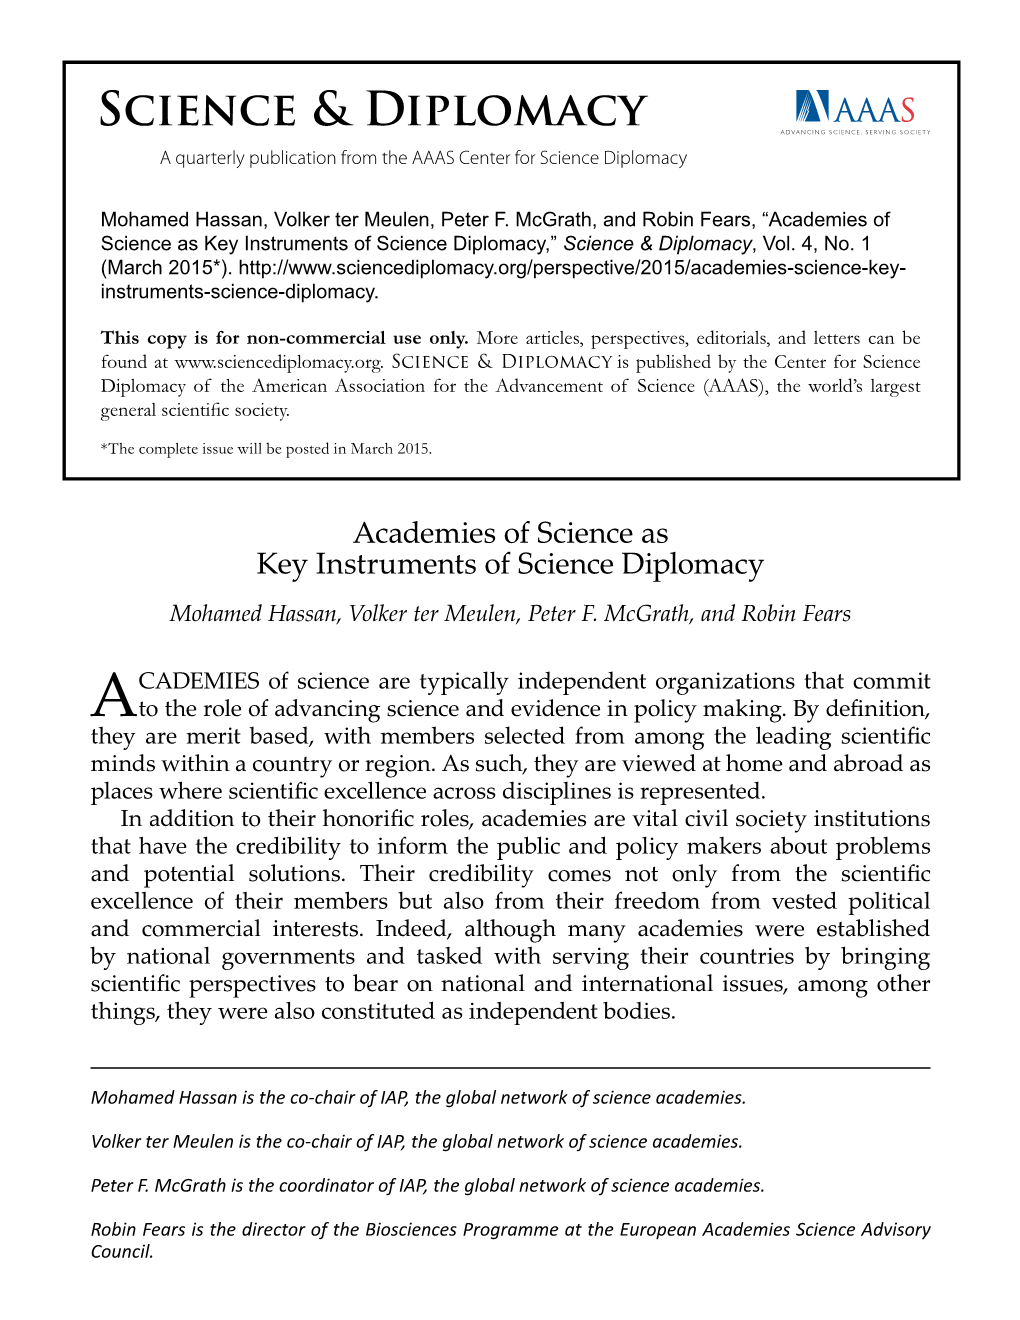 Academies of Science As Key Instruments of Science Diplomacy,” Science & Diplomacy, Vol